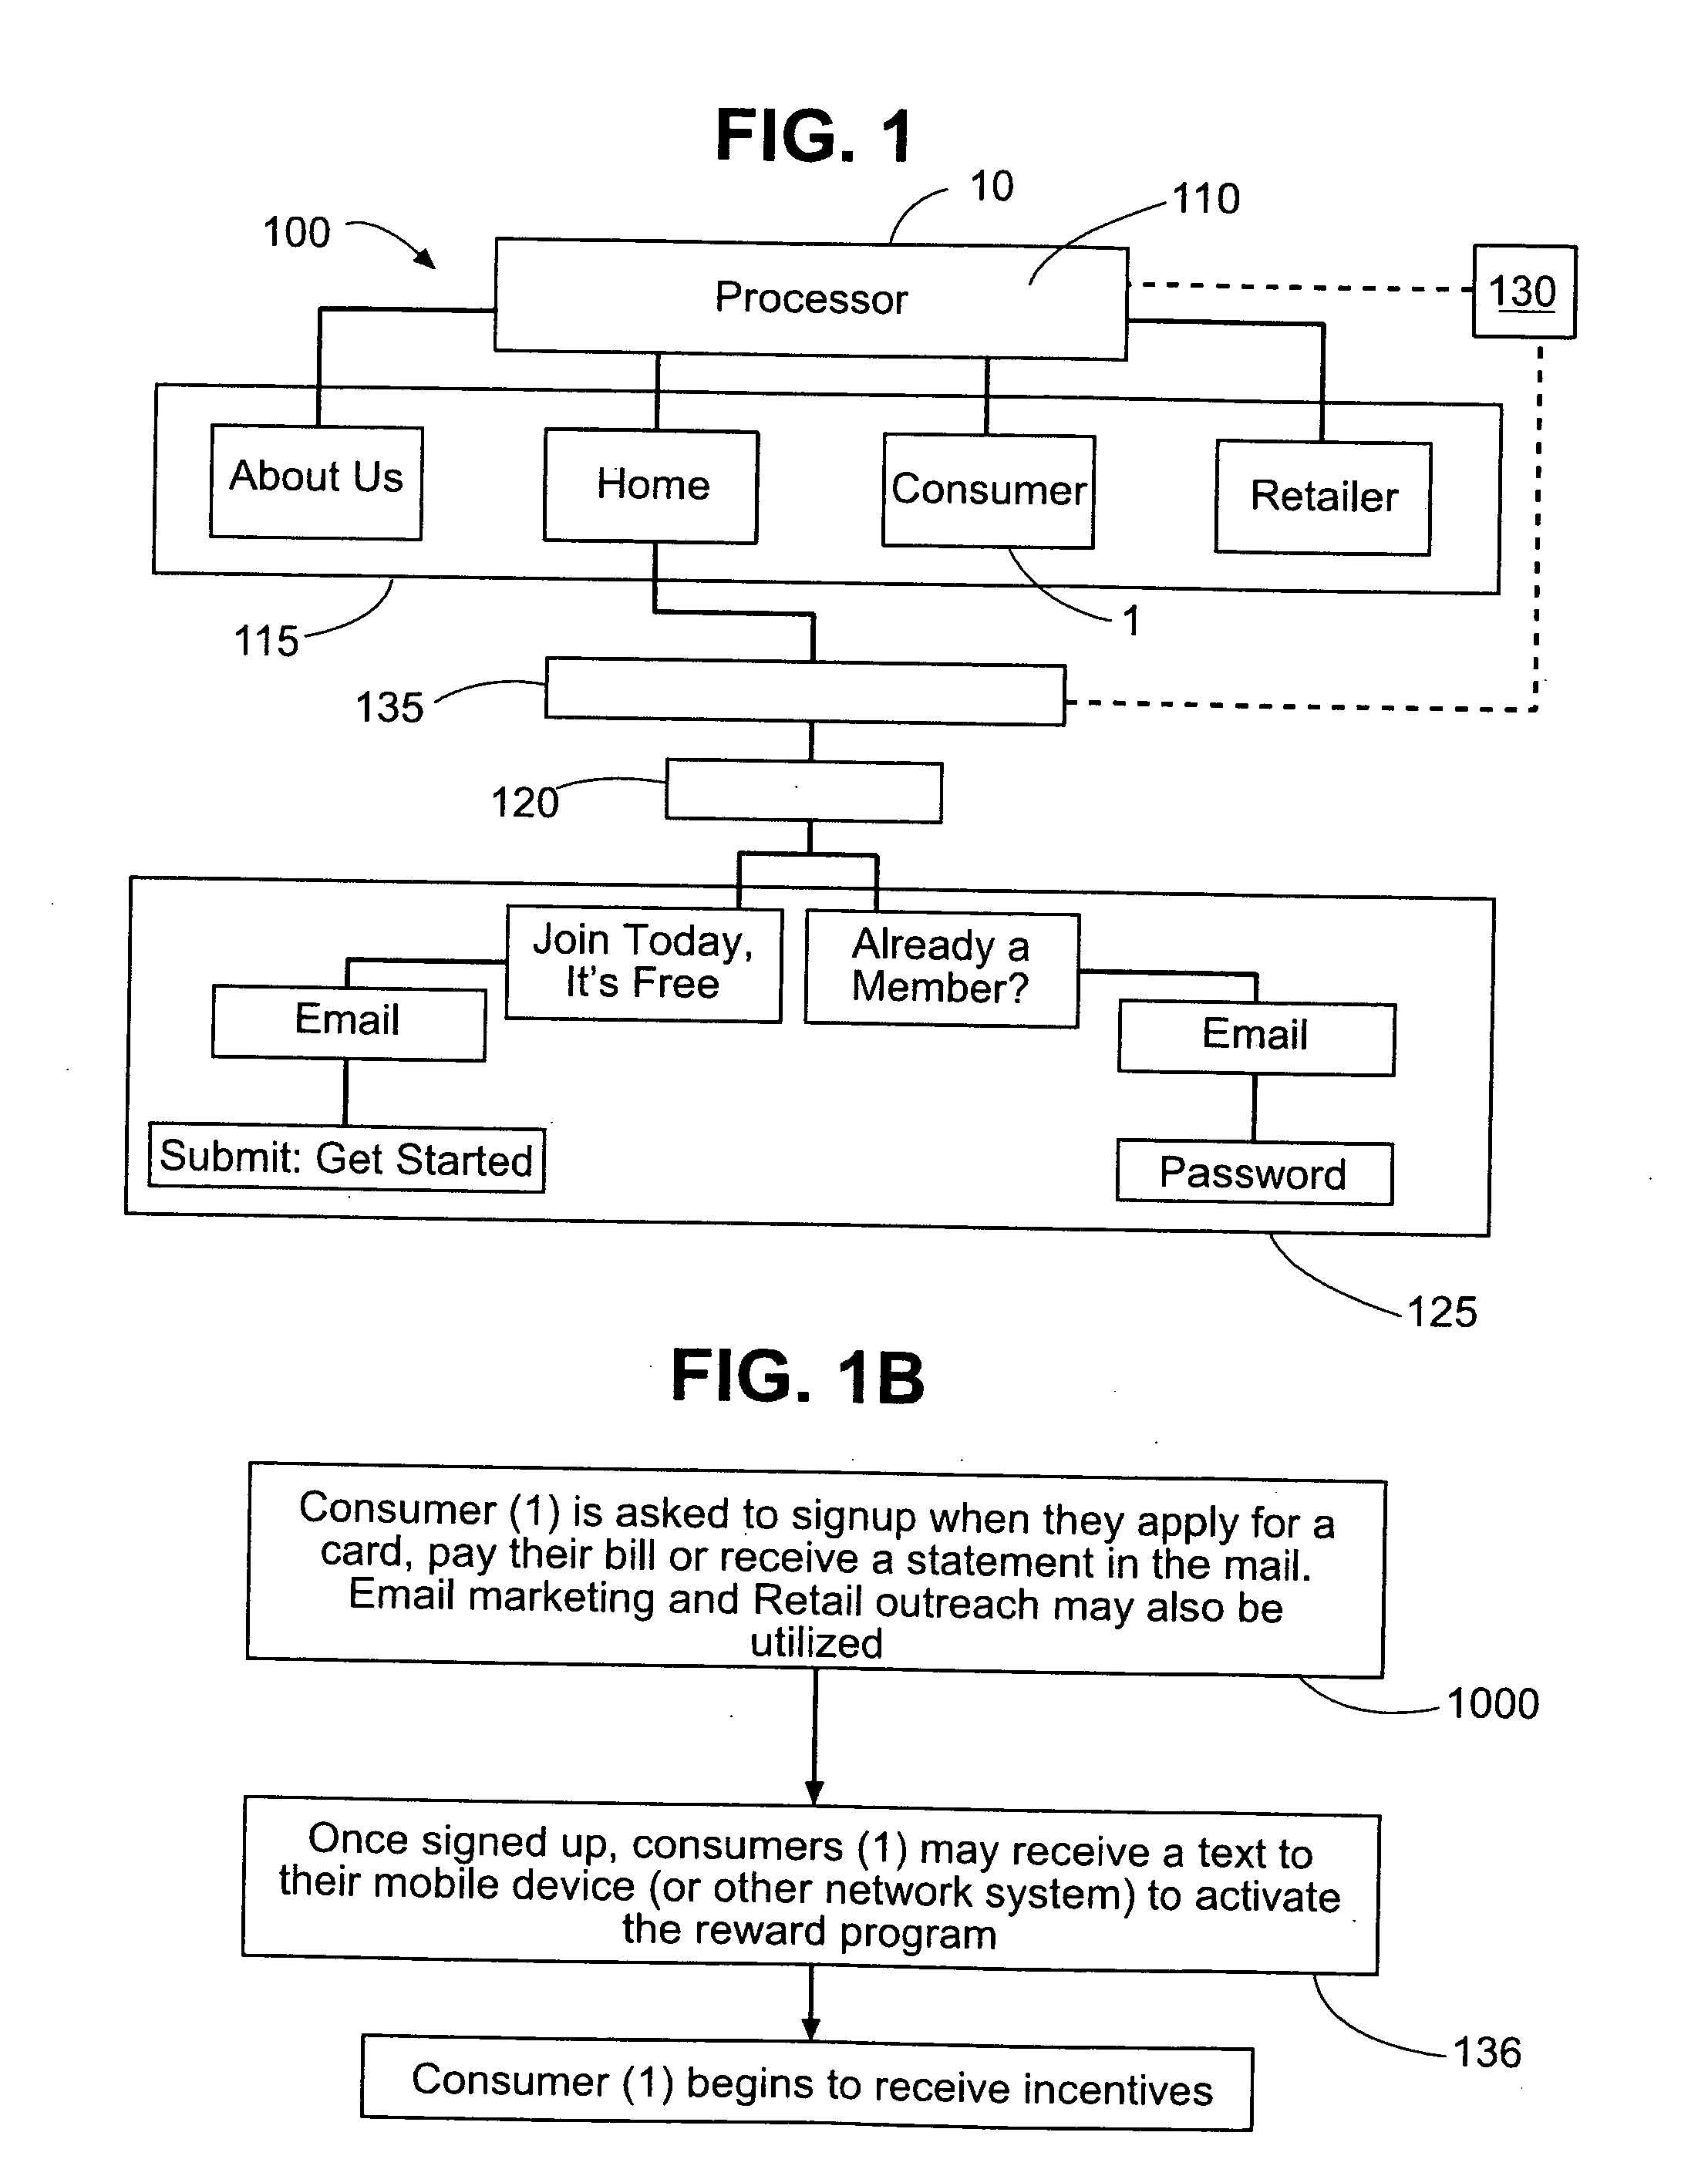 Electronic incentivie methods and systems for enabling carbon credit rewards and interactive participation of individuals and groups within the system